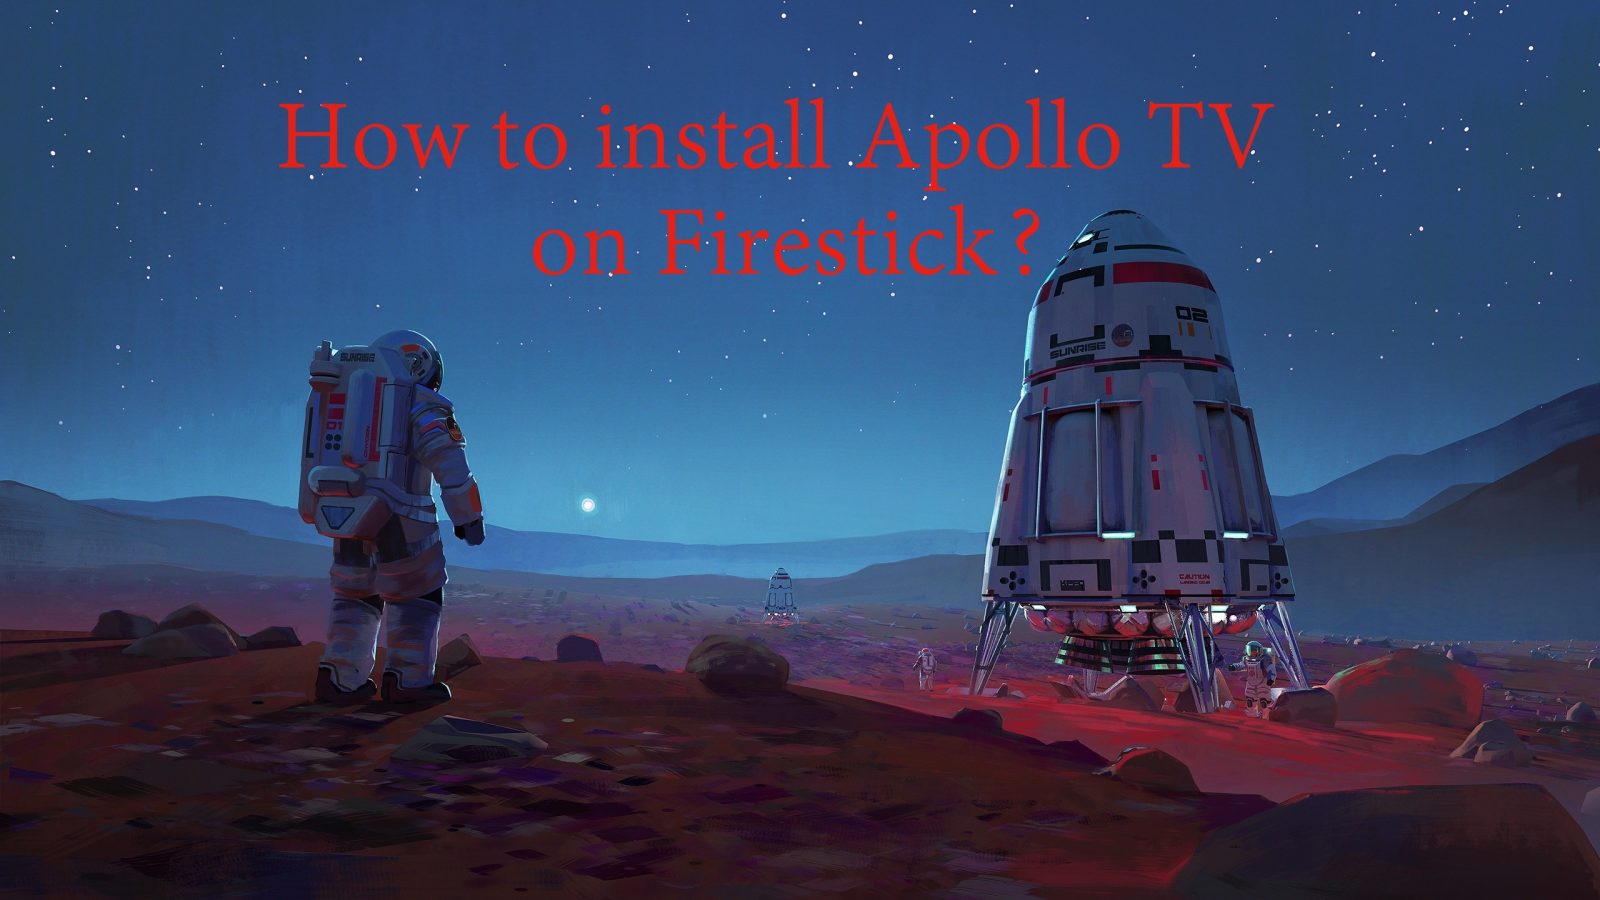 How to Install Apollo TV on Firestick [2021]